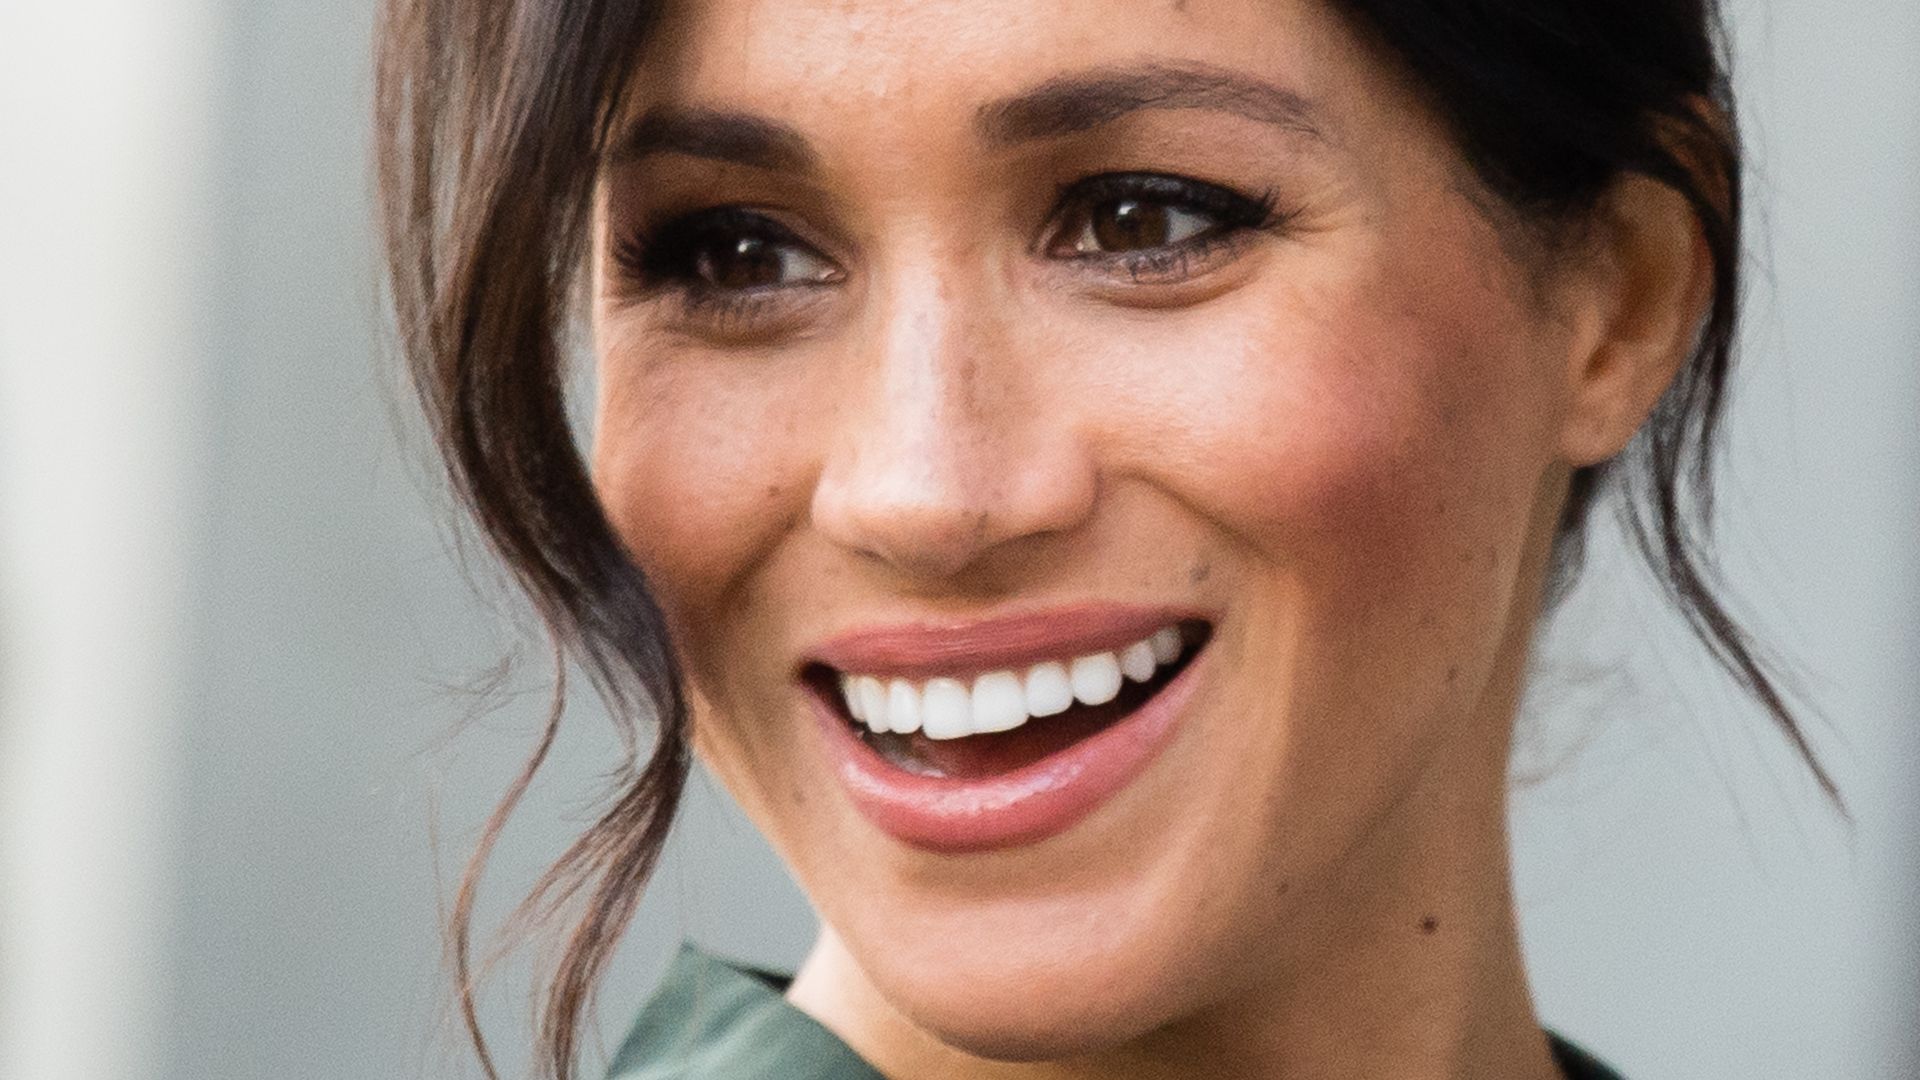 Meghan Markle smiling widely